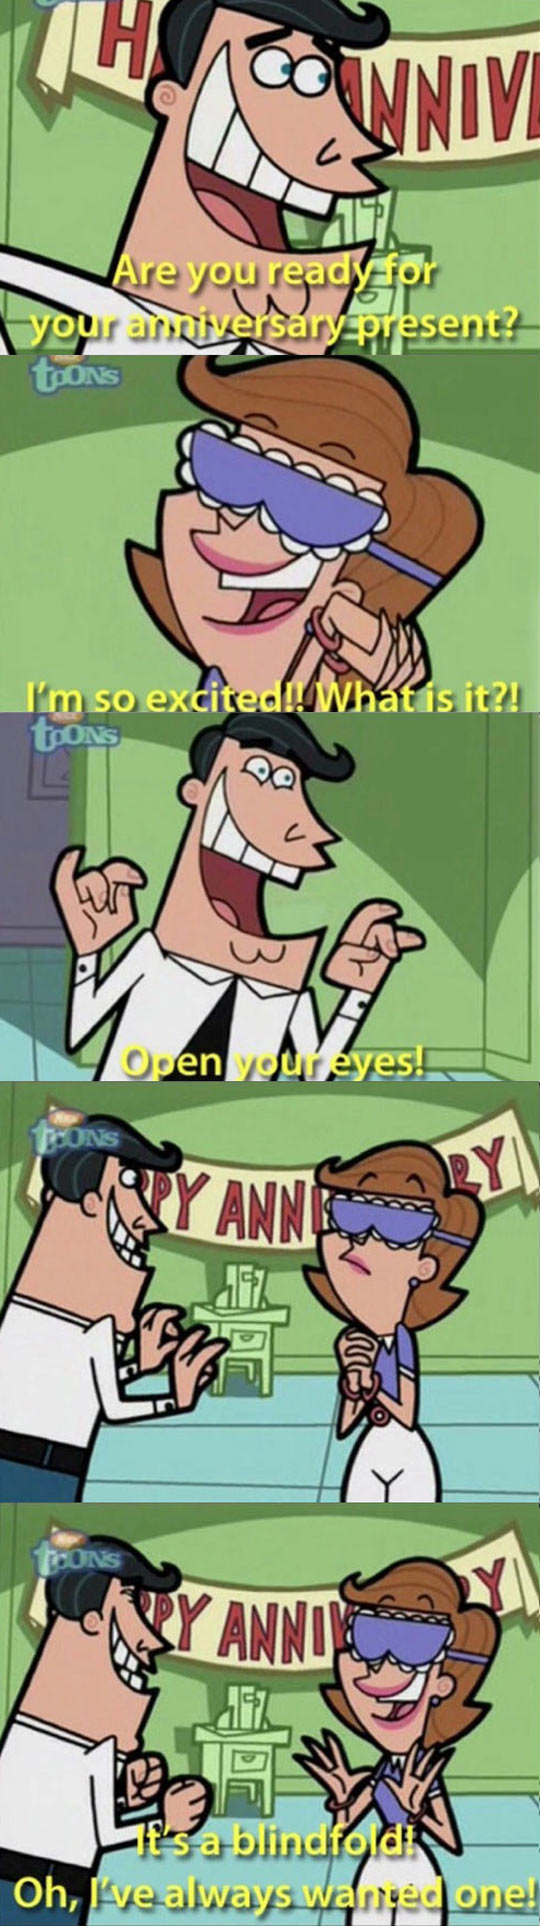 My favorite scene from Fairly OddParents…